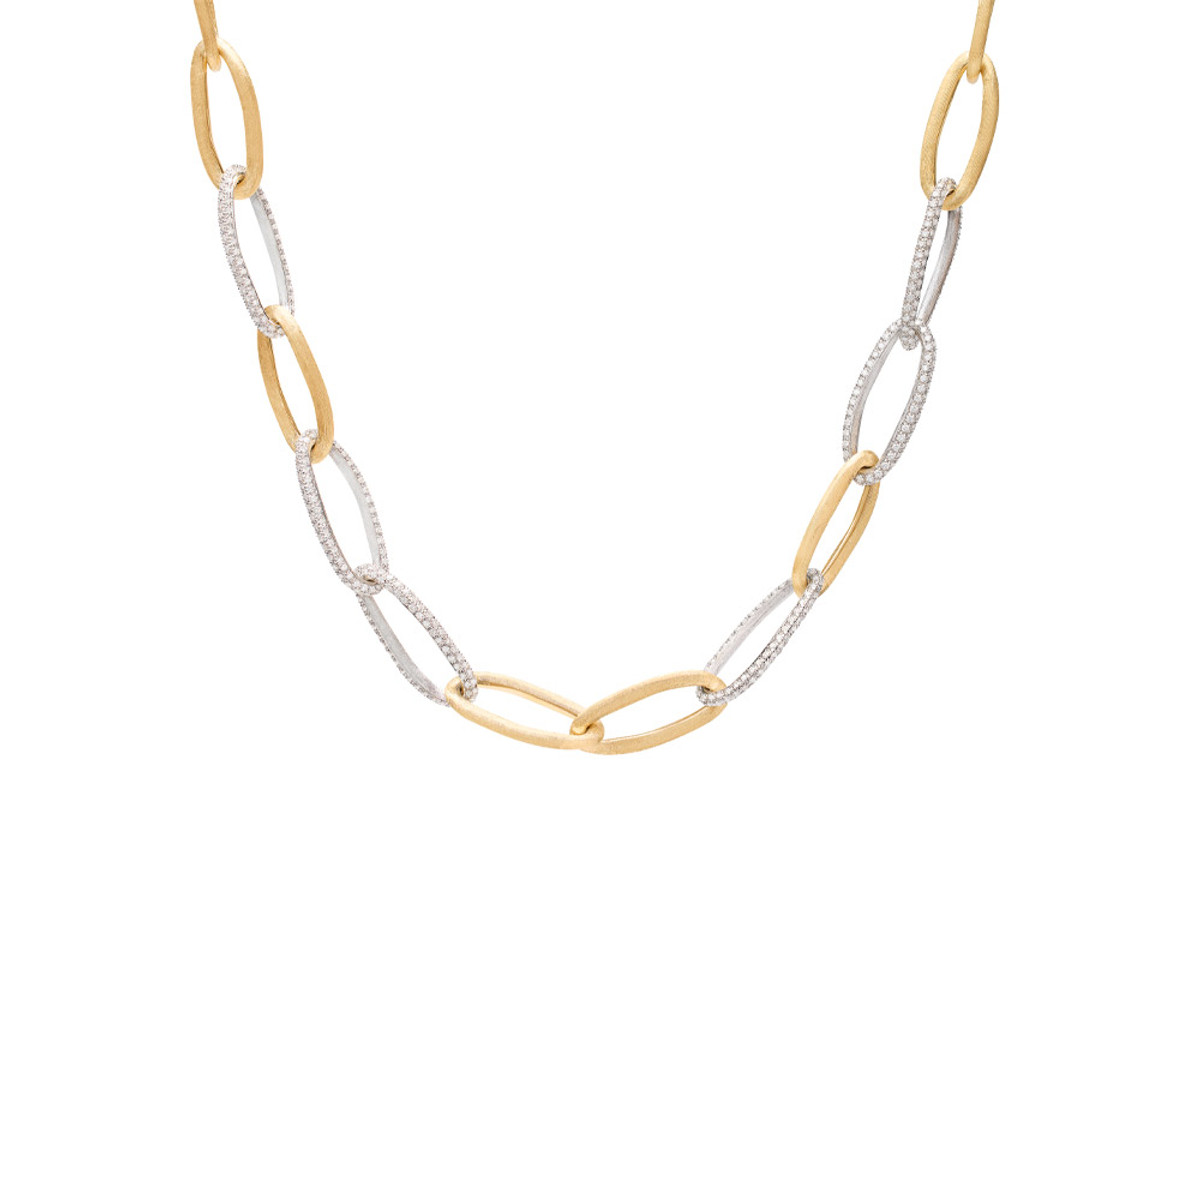 Marco Bicego Alta Collection 18K Yellow Gold Diamond Link Necklace-54238 Product Image